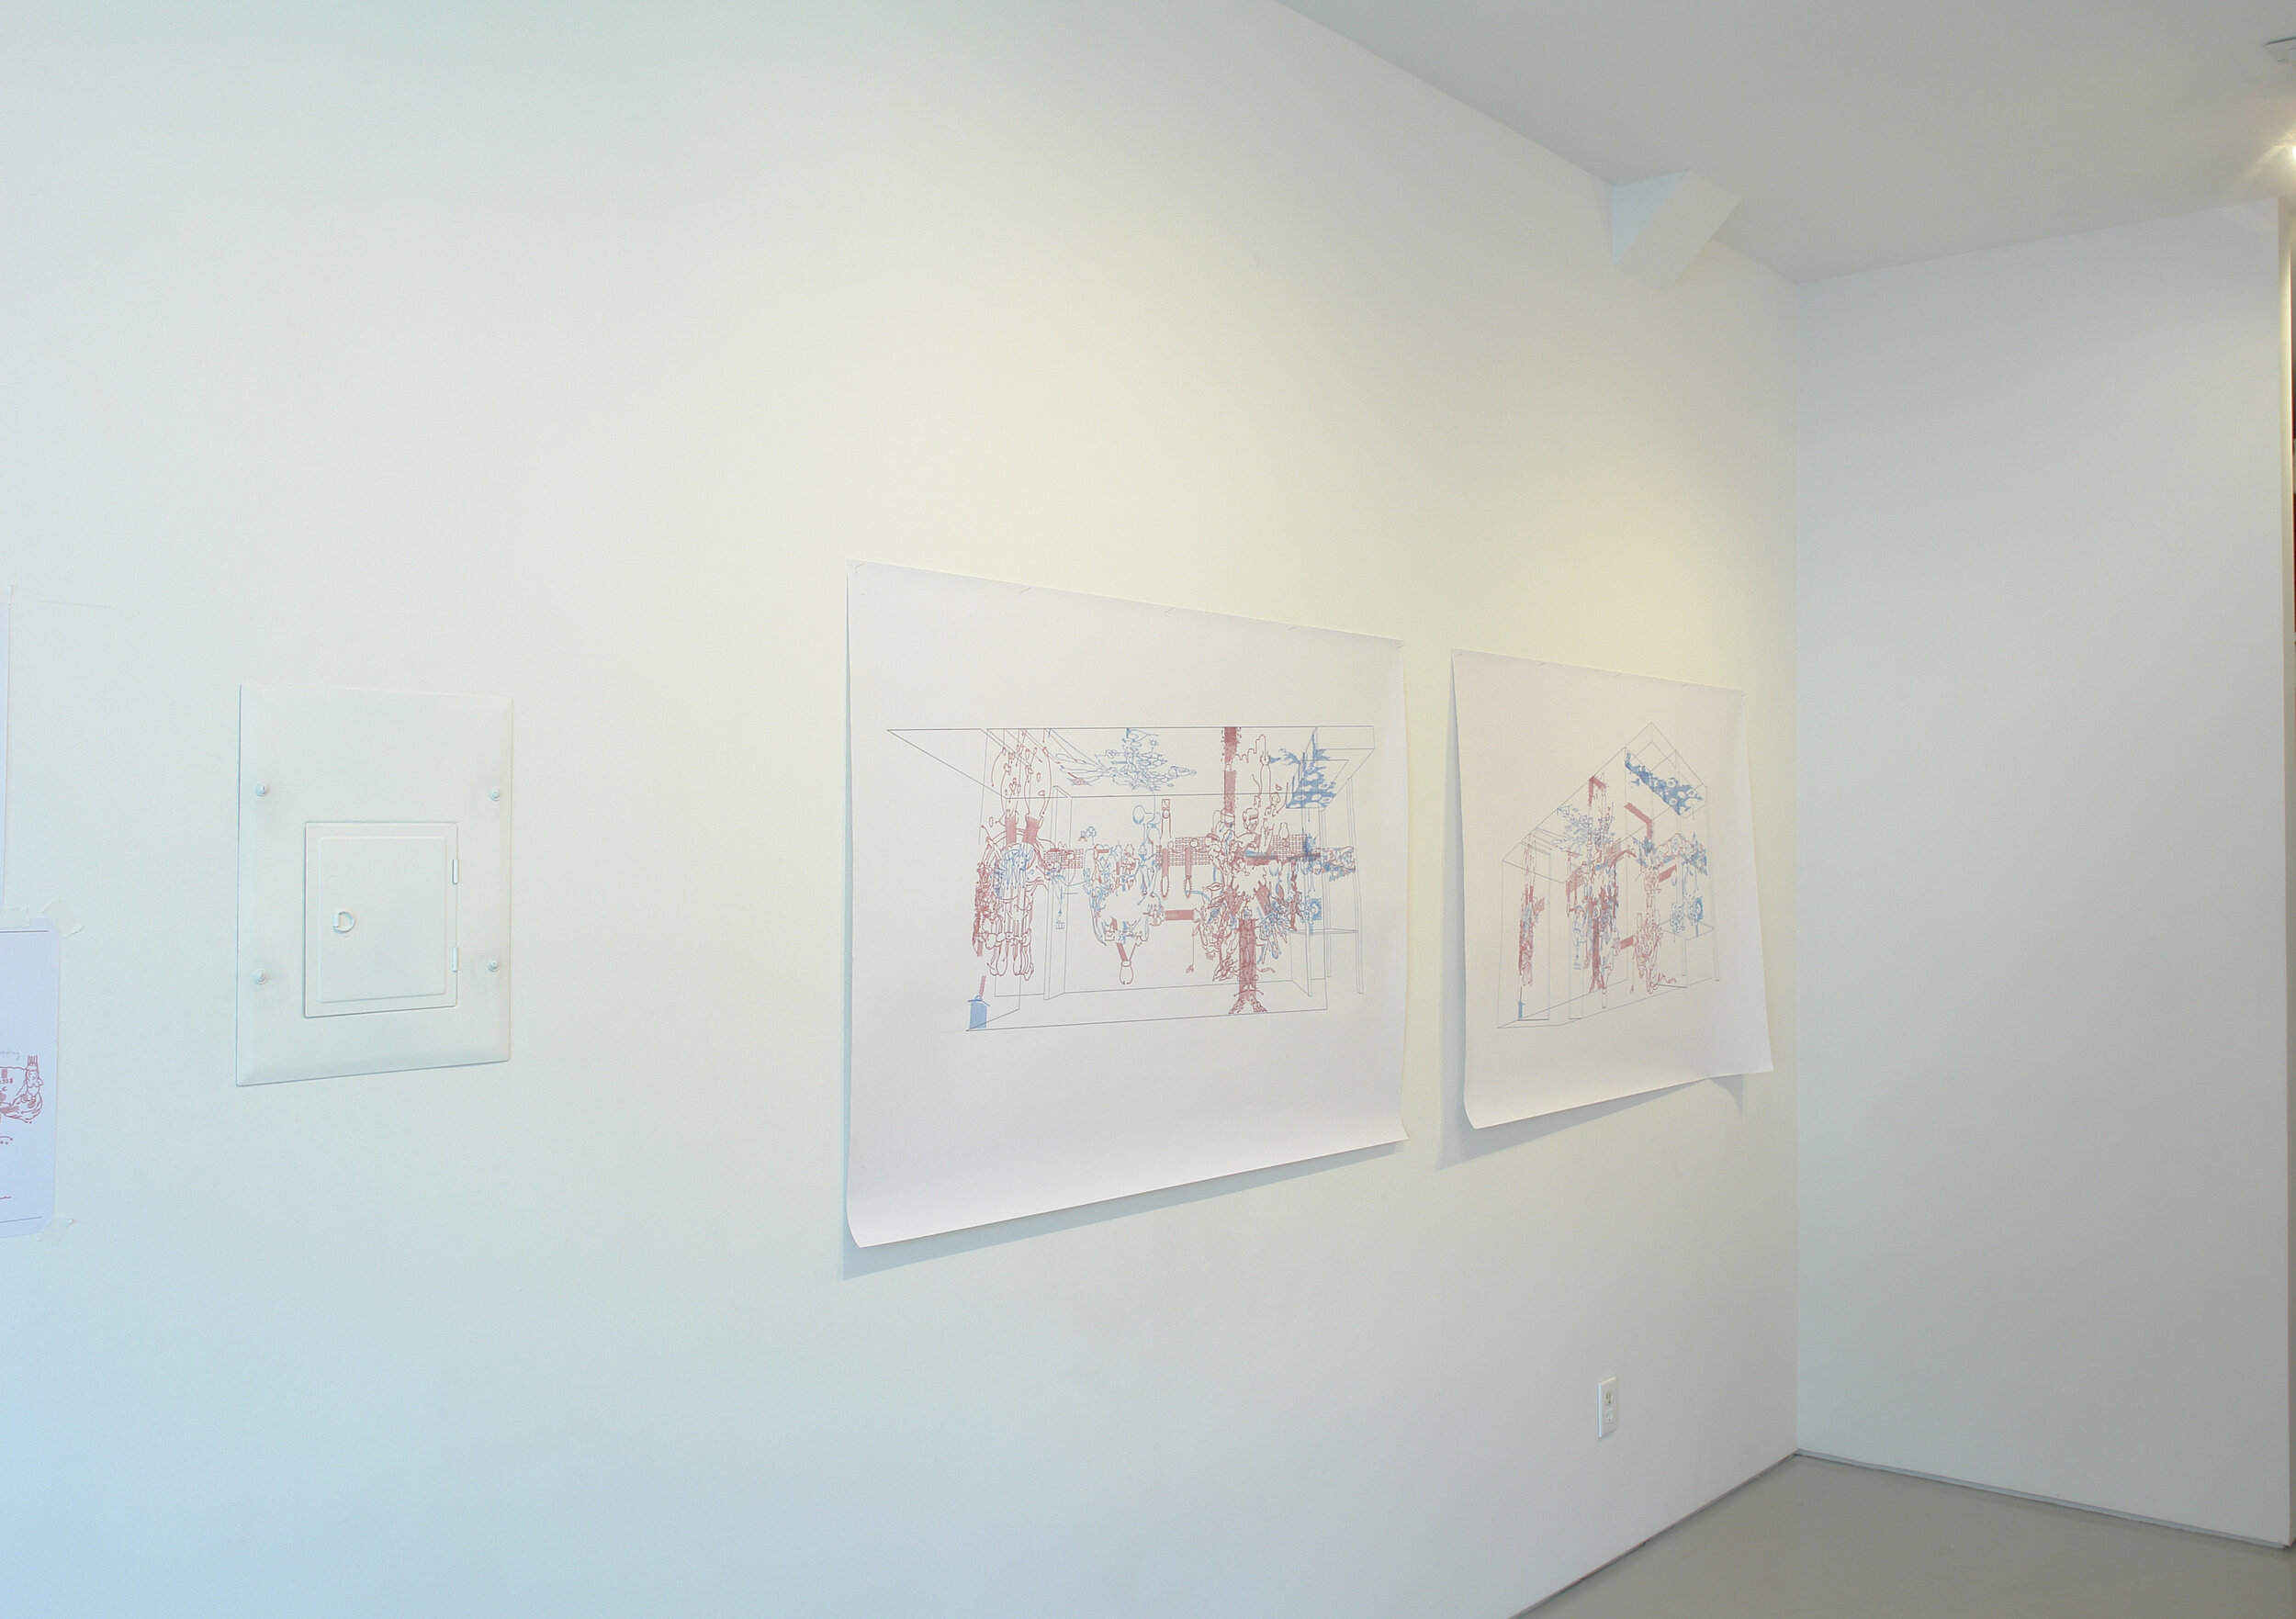 Installation image from the 2008 Hannes Kater exhibition, Right Drawings in Wrong Settings, at Cindy Rucker Gallery, Number 35